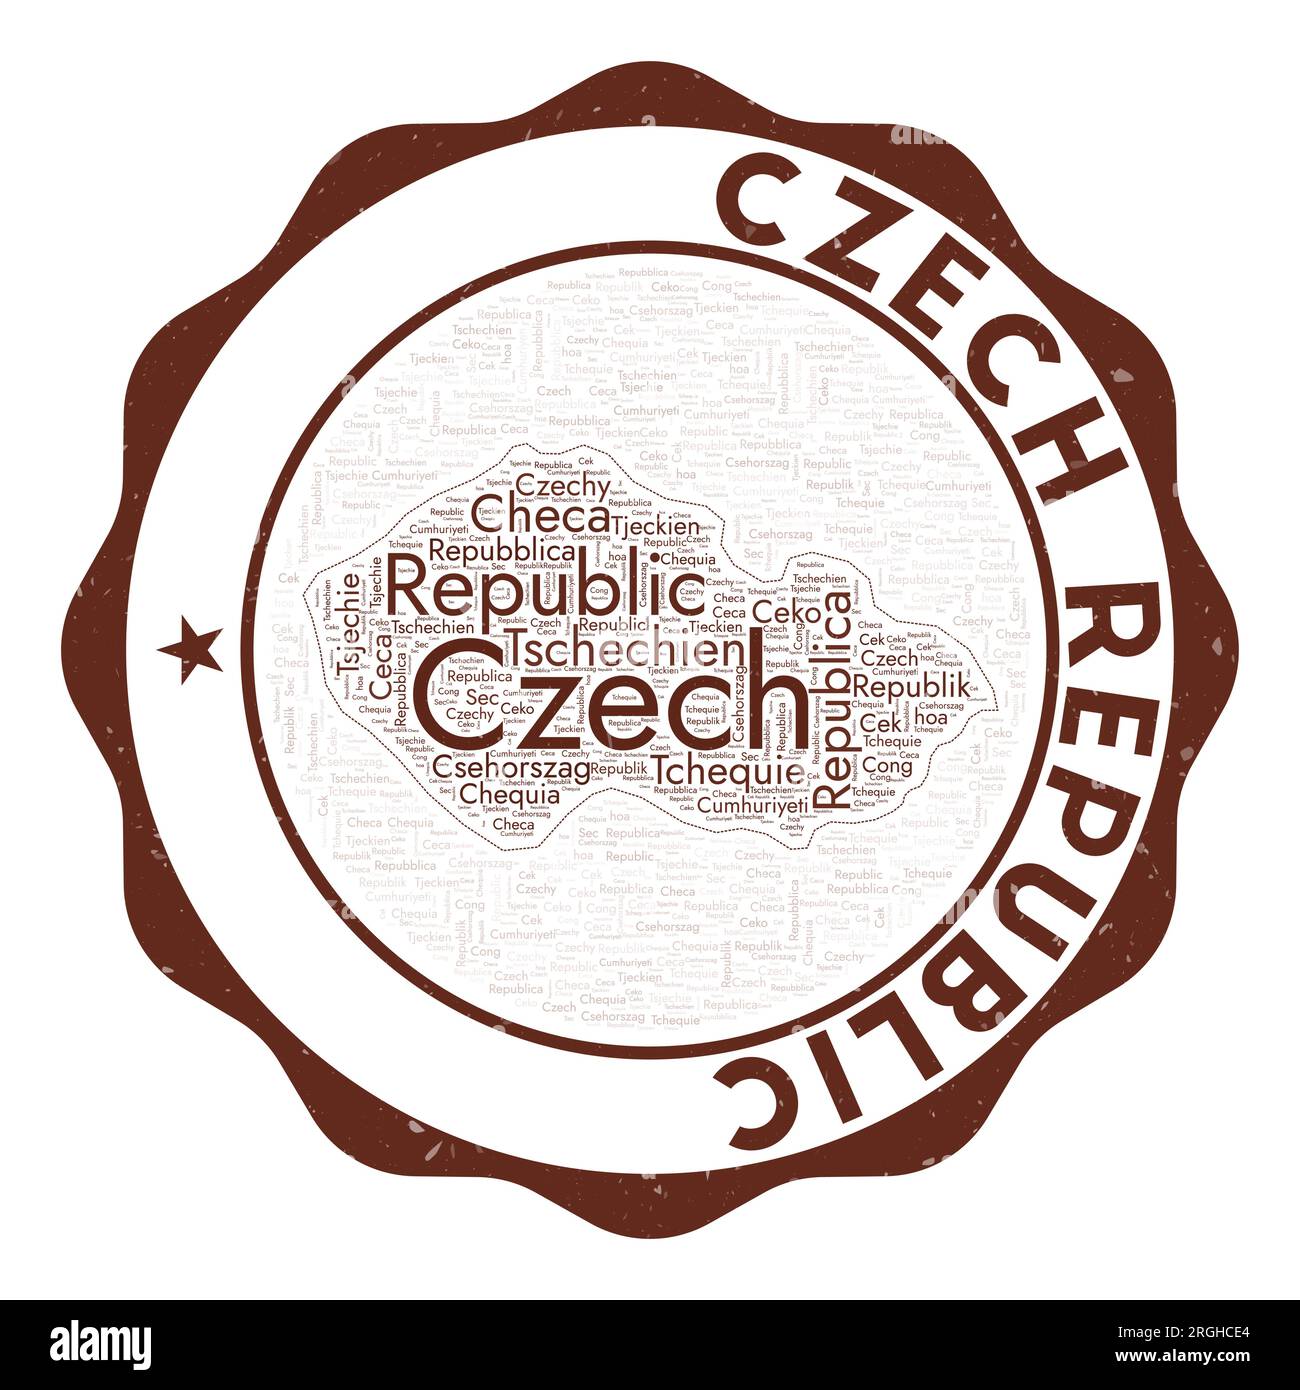 Czech Republic logo. Awesome country badge with word cloud in shape of Czech Republic. Round emblem with country name. Authentic vector illustration. Stock Vector